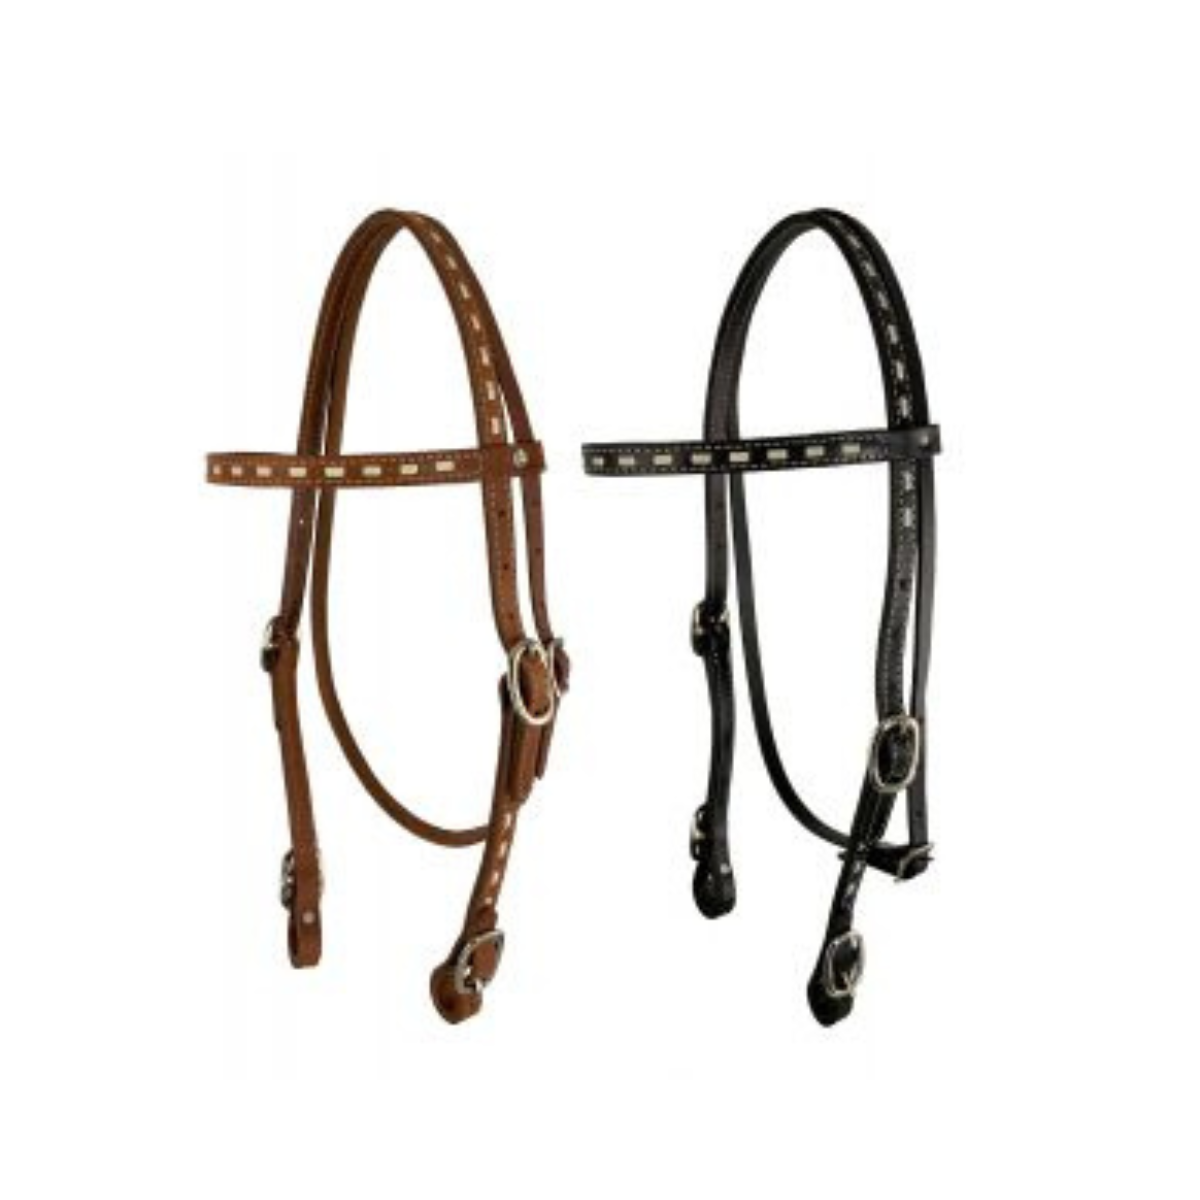 Argentina Cow Leather buck stitched headstall